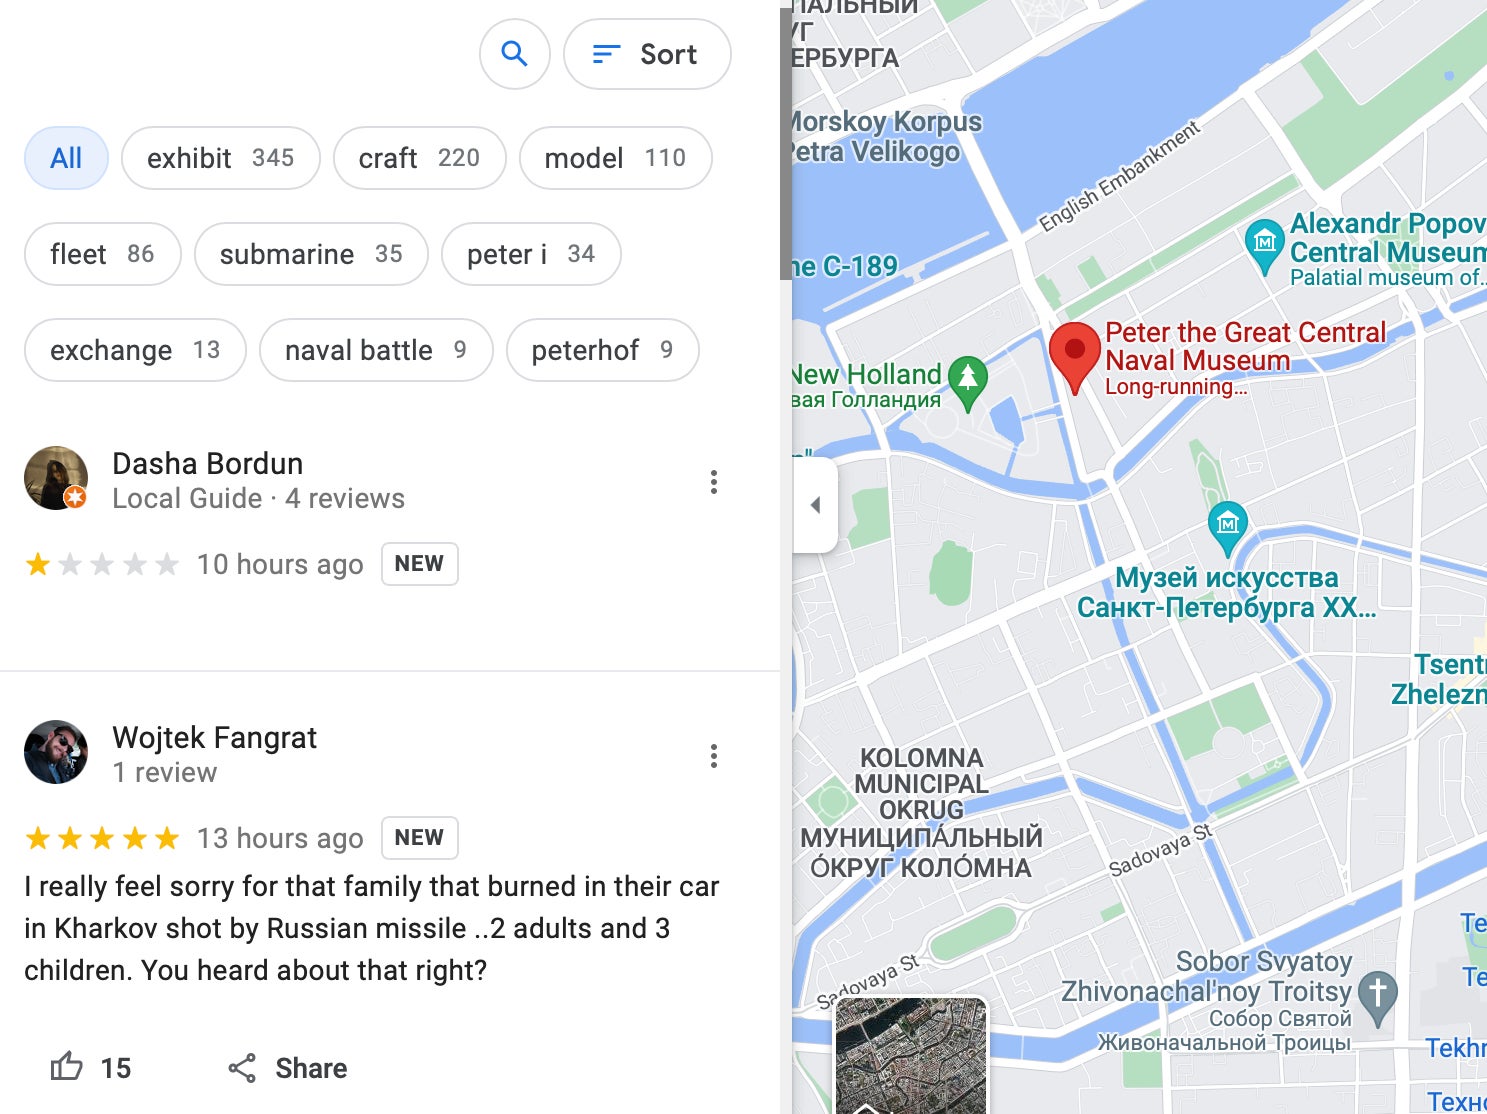 Reviews left on Google Maps for St Petersburg’s naval museum